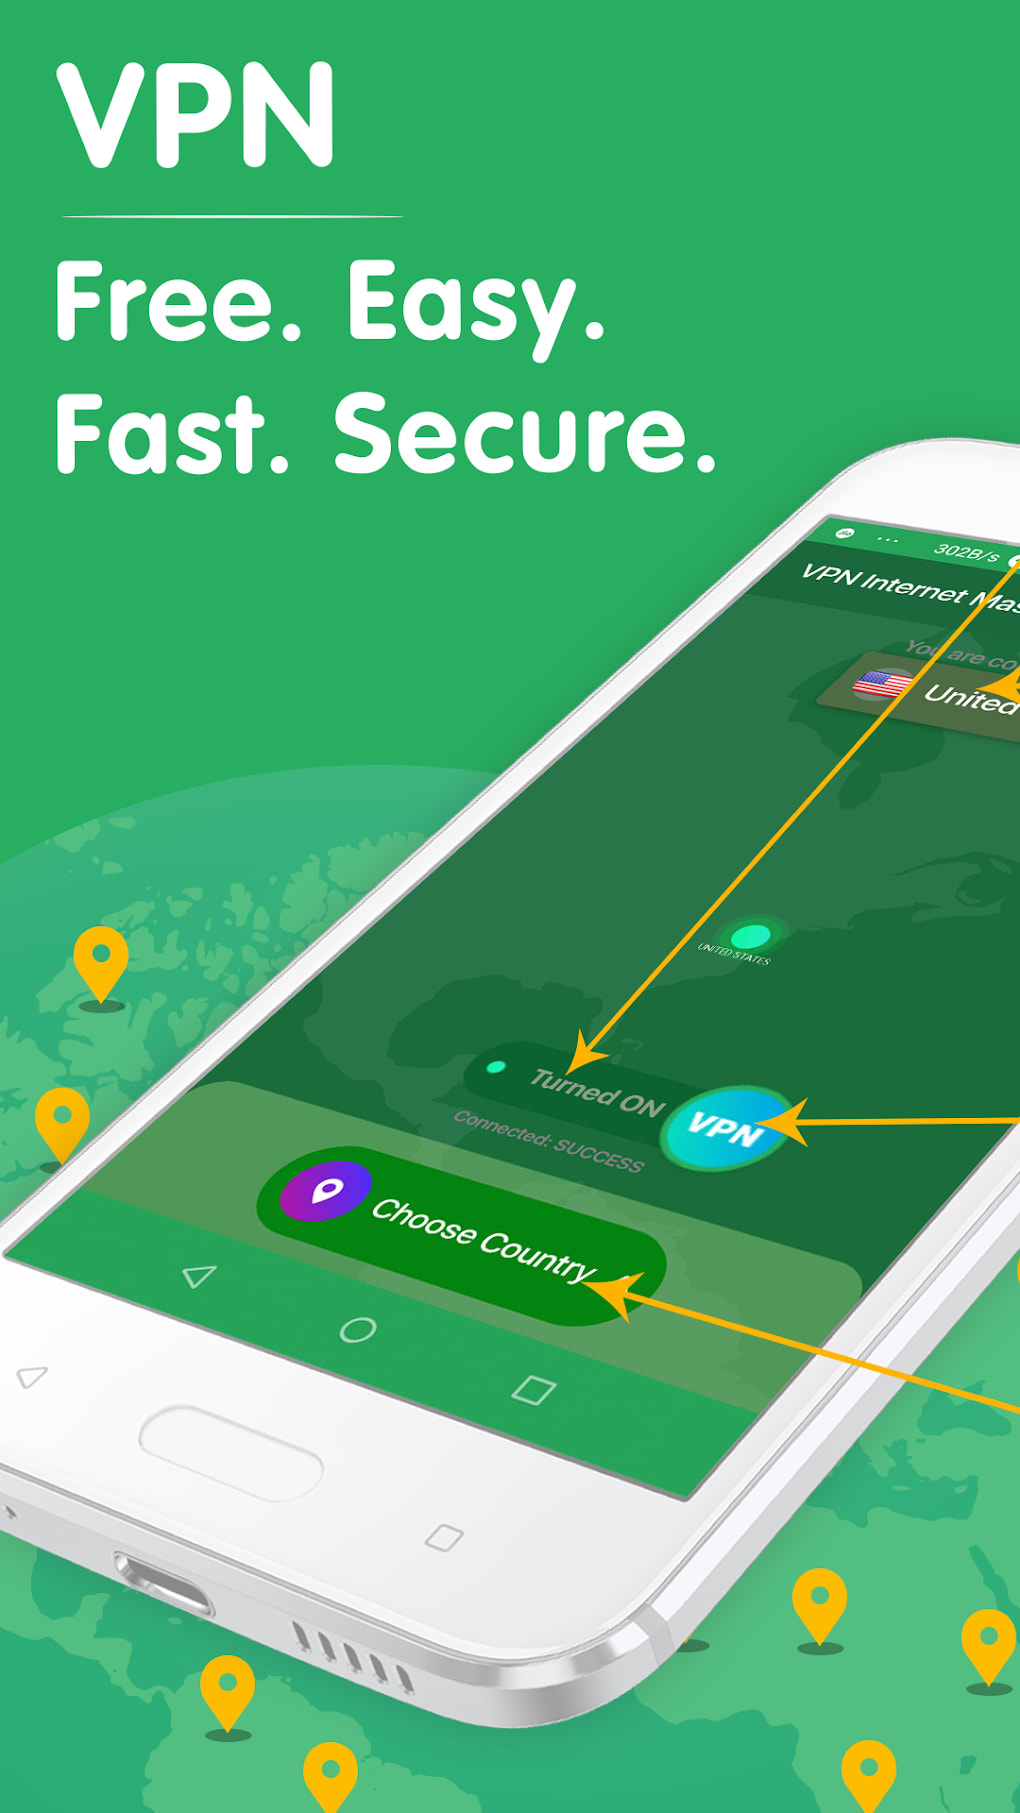 VPN - Super Unlimited Proxy - Apps on Google Play